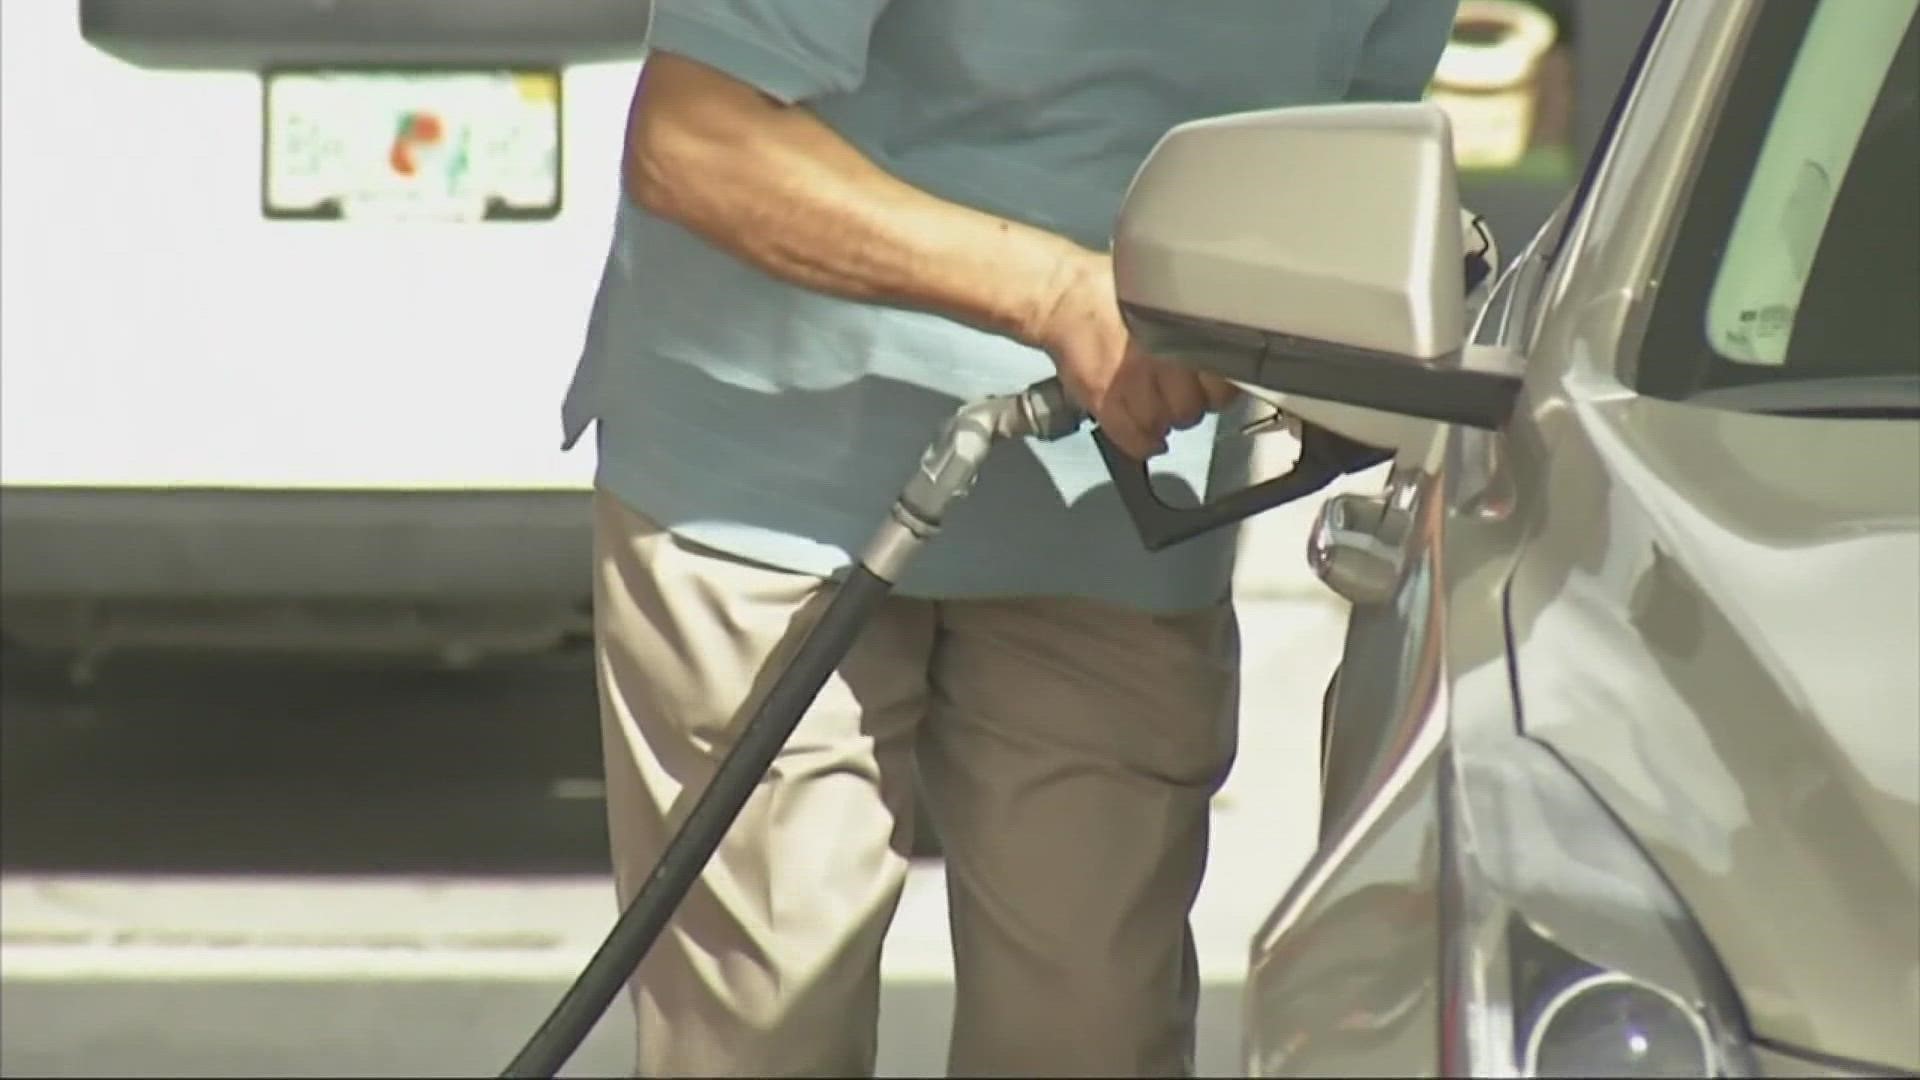 Patrick DeHaan says consumers will see some relief at the pump. Just not as much as they would like.